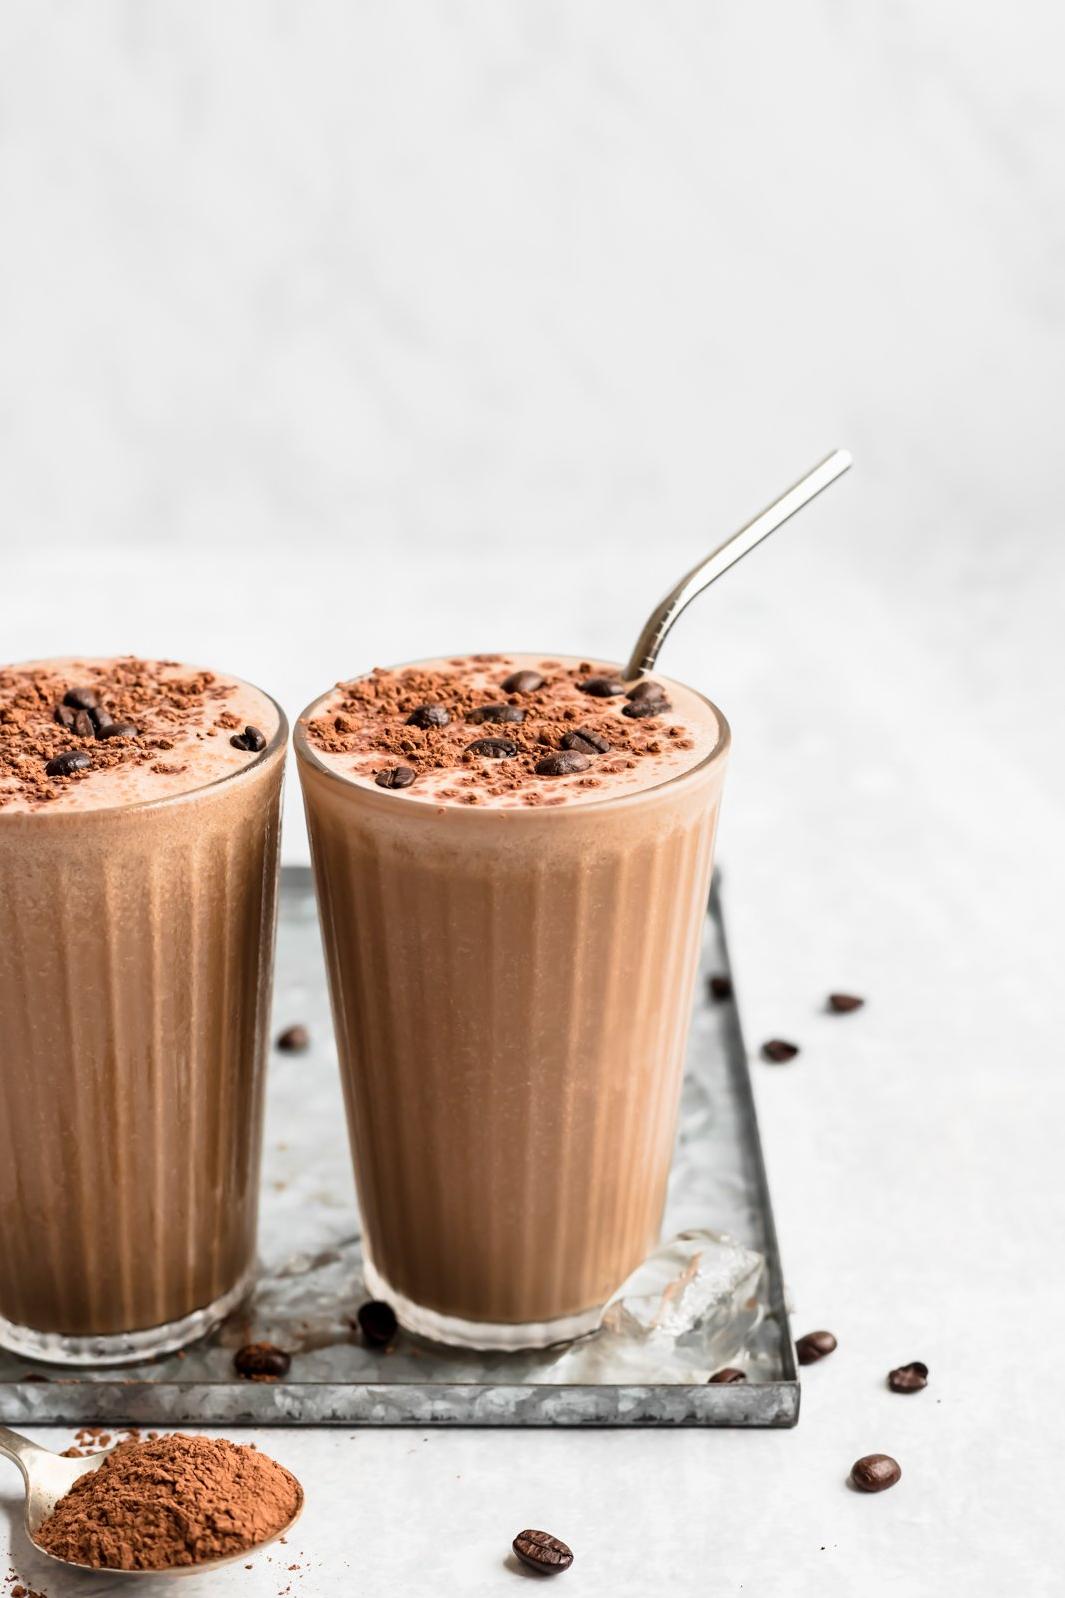  Satisfy your coffee and chocolate cravings in one delicious drink!